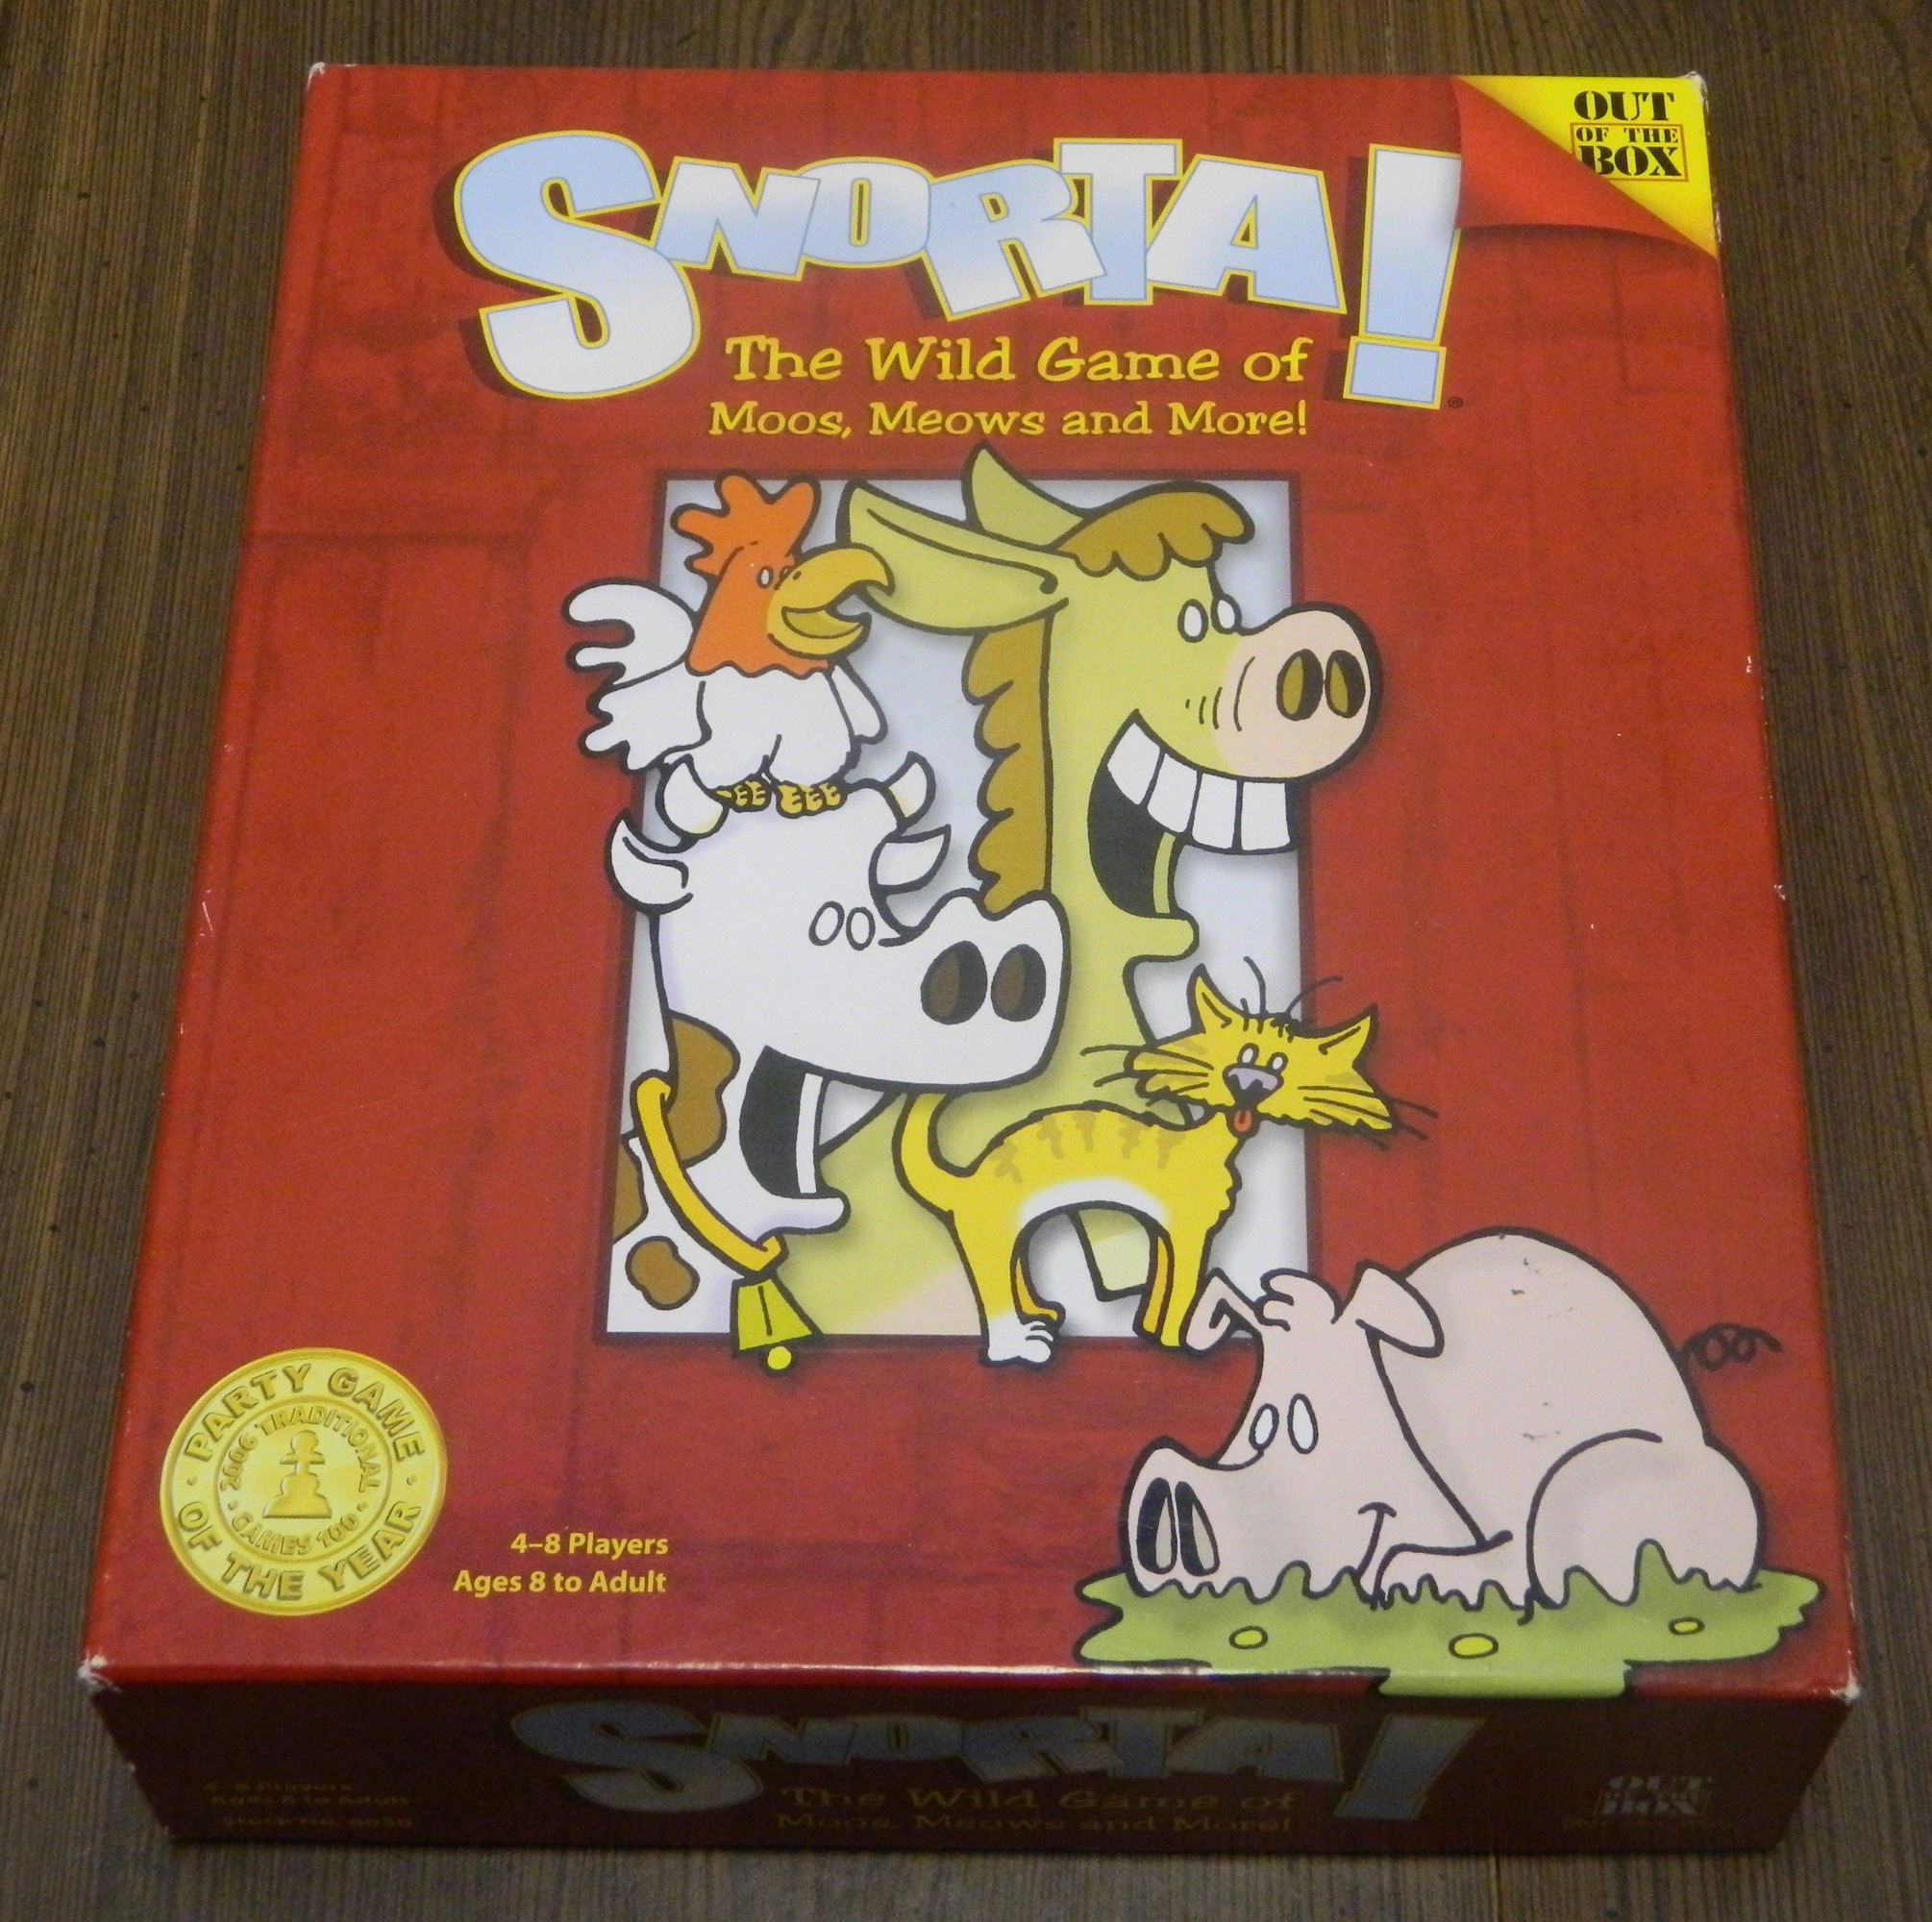 Snorta! Party Game Review